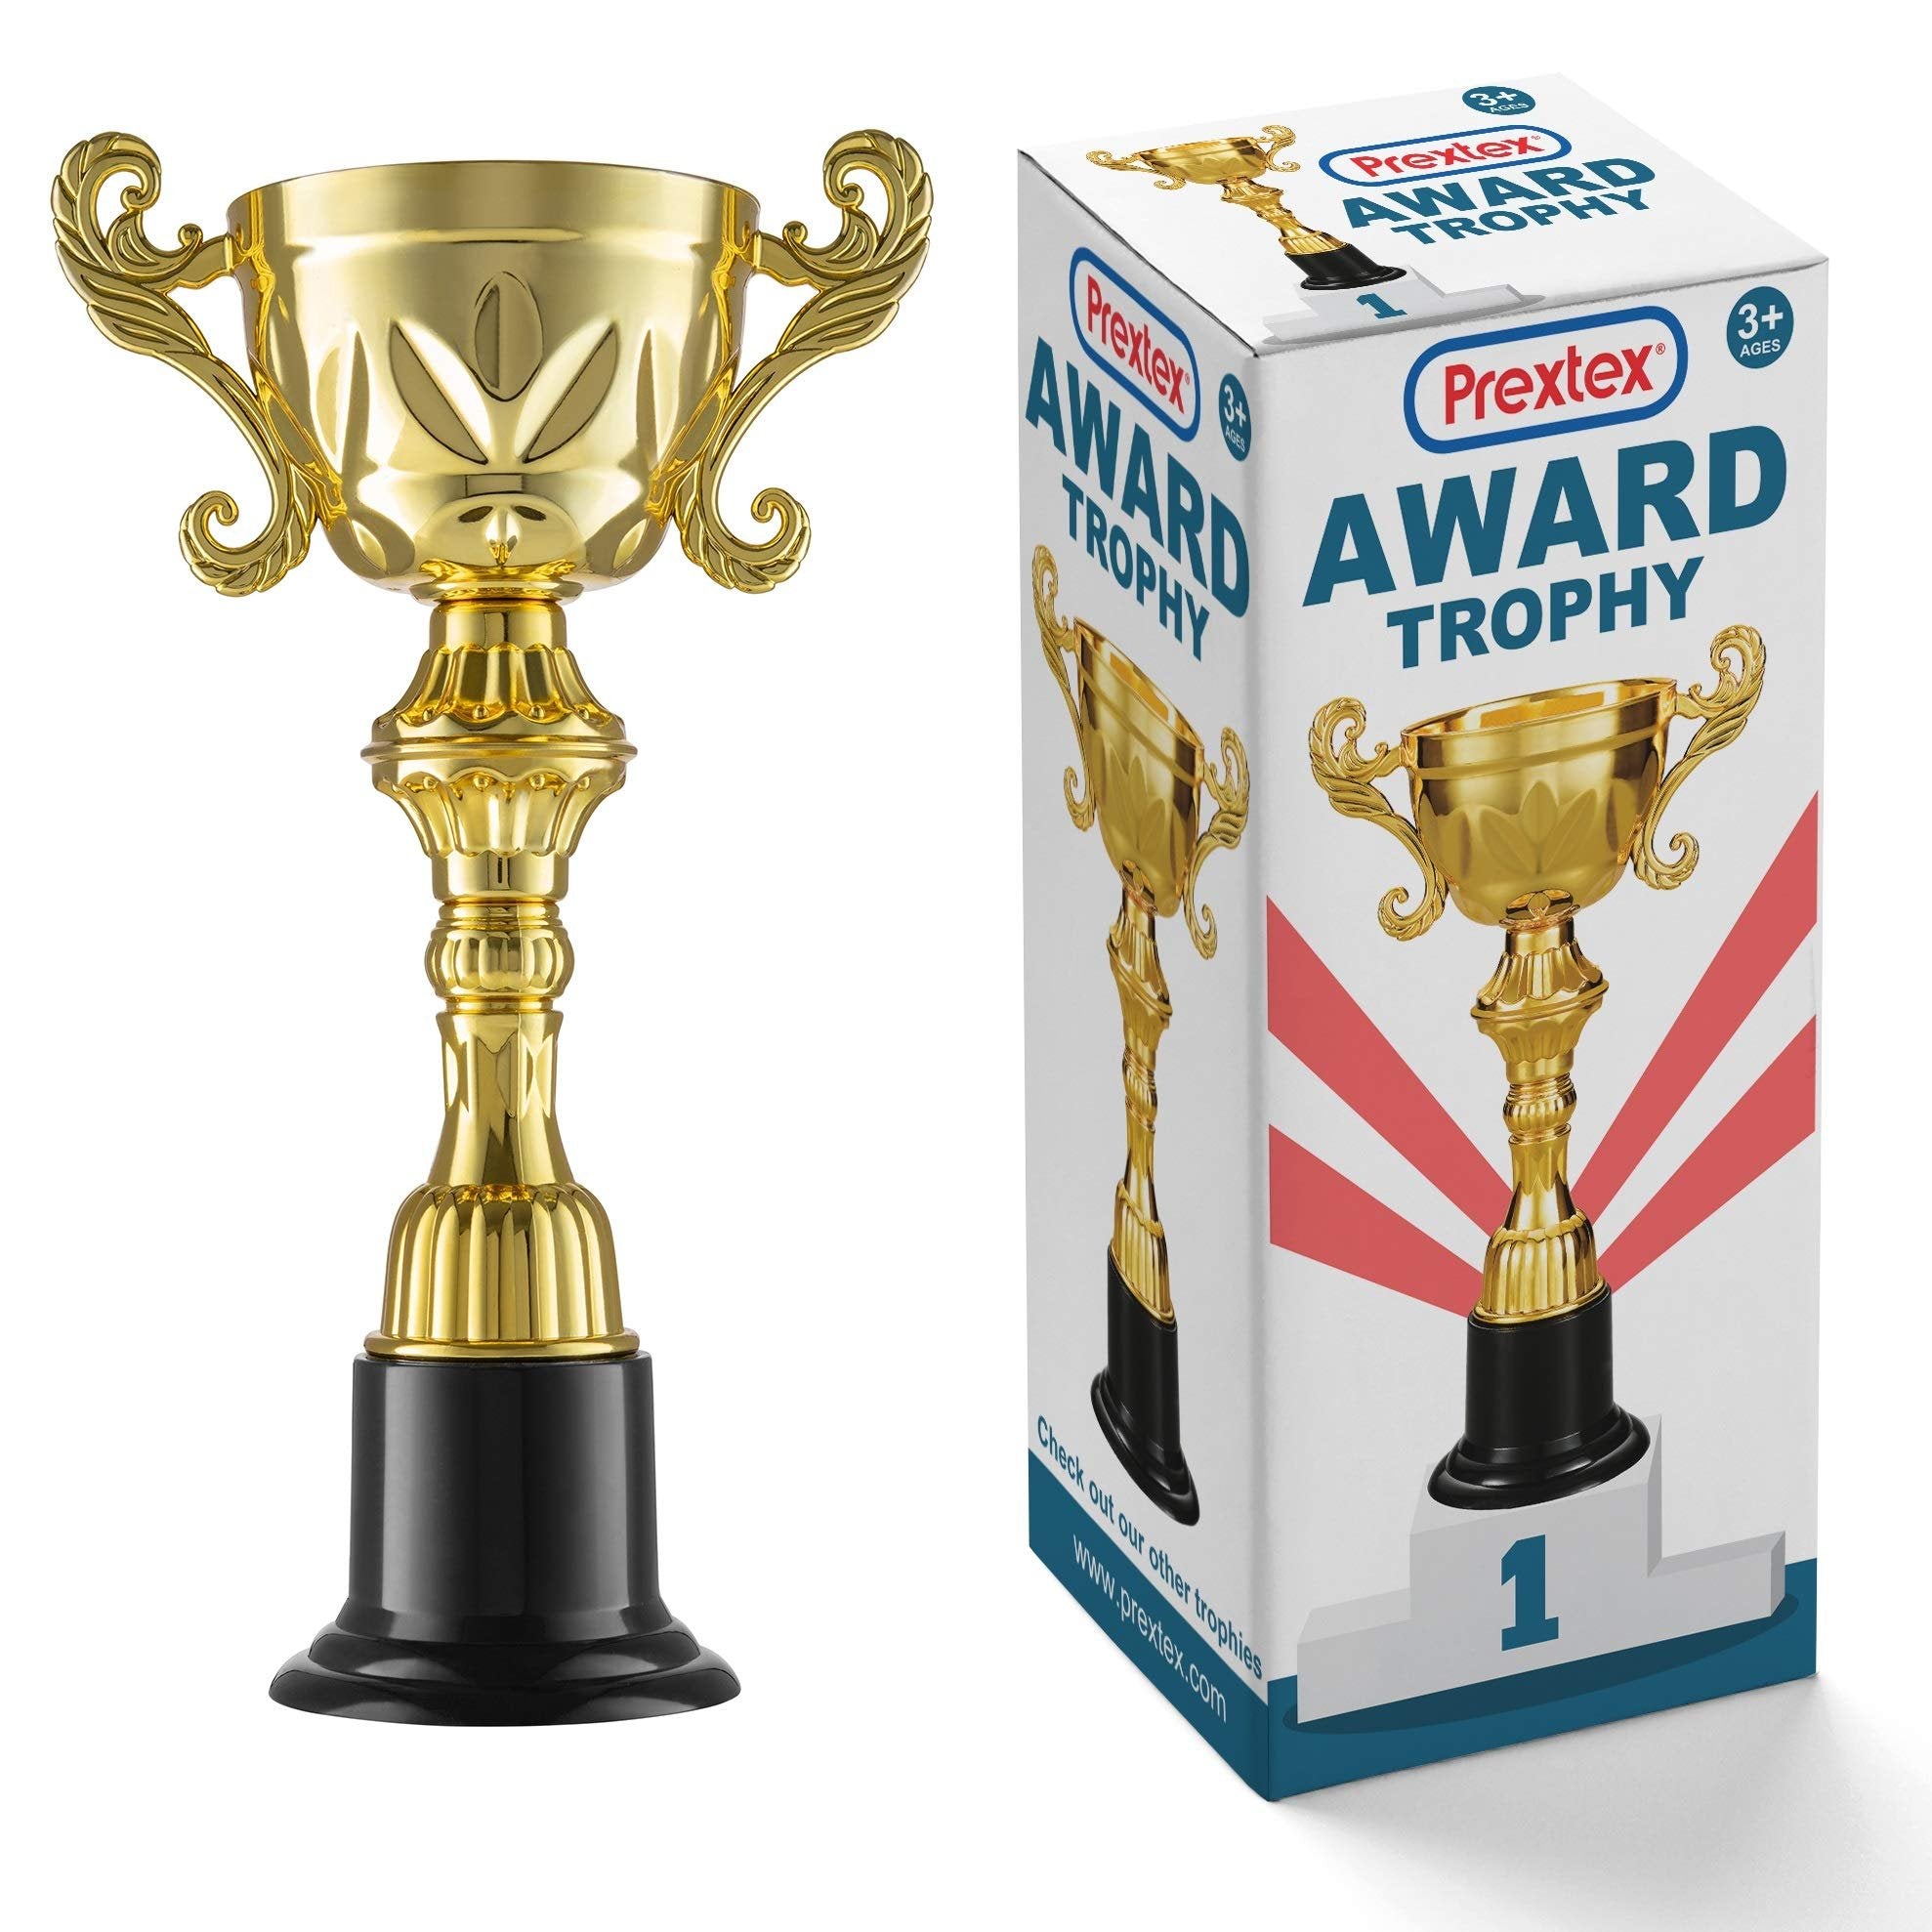 PREXTEX Gold Star Trophy Award - Awards and Trophies for Party Celebrations, Award Ceremonies, and Appreciation Gifts - Ideal for Competitions, Rewards, and Party Favors for Kids & Adults